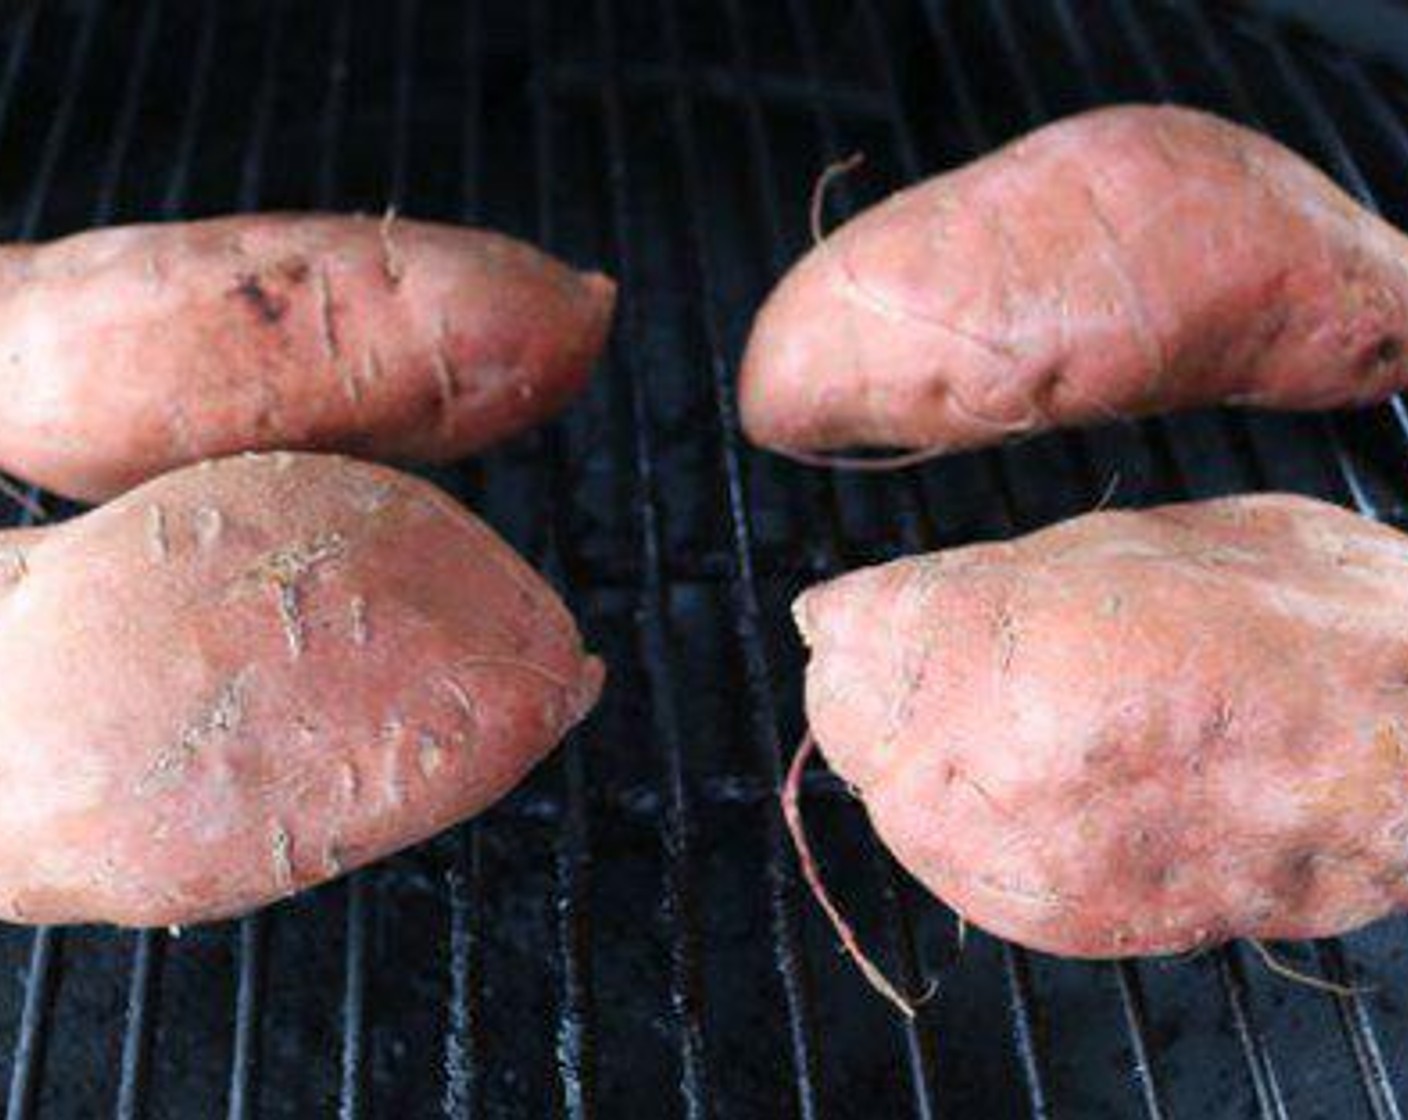 step 2 Place Sweet Potatoes (4) on smoker and cook for 1:30 hours or until soft. Skewer should go into the potato with no resistance. Remove the sweet potatoes from the smoker and adjust vents so temperature drops to 350 degrees F (180 degrees C).